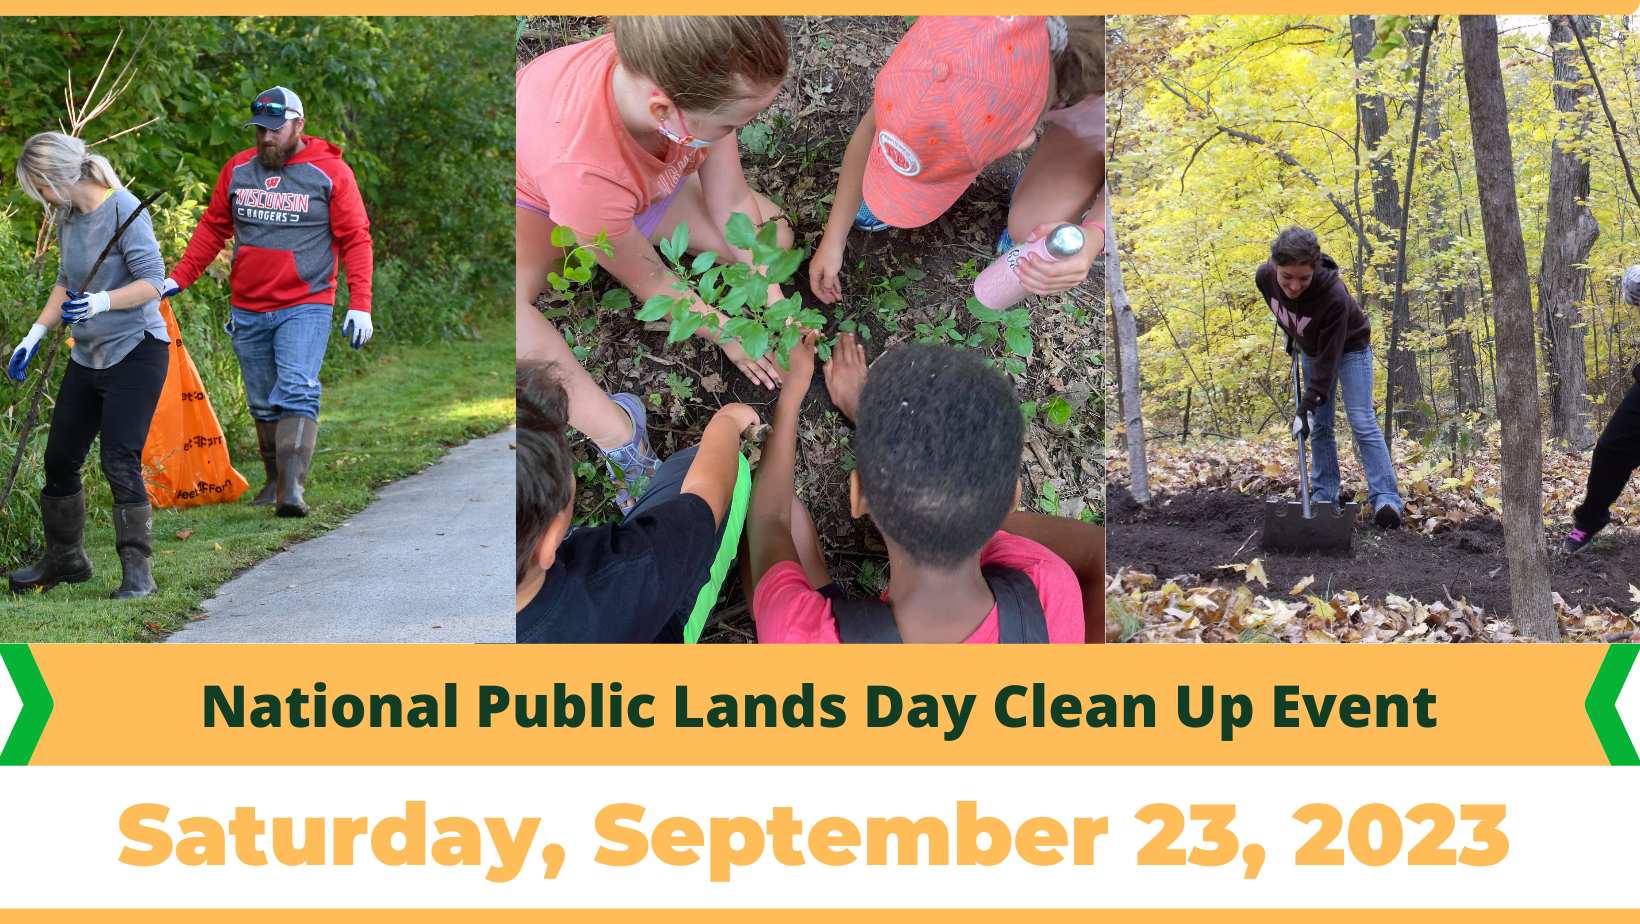 Collage of people cleaning up trash outside with text reading "National Public Lands Day Clean Up Event. Saturday, September 23, 2023"